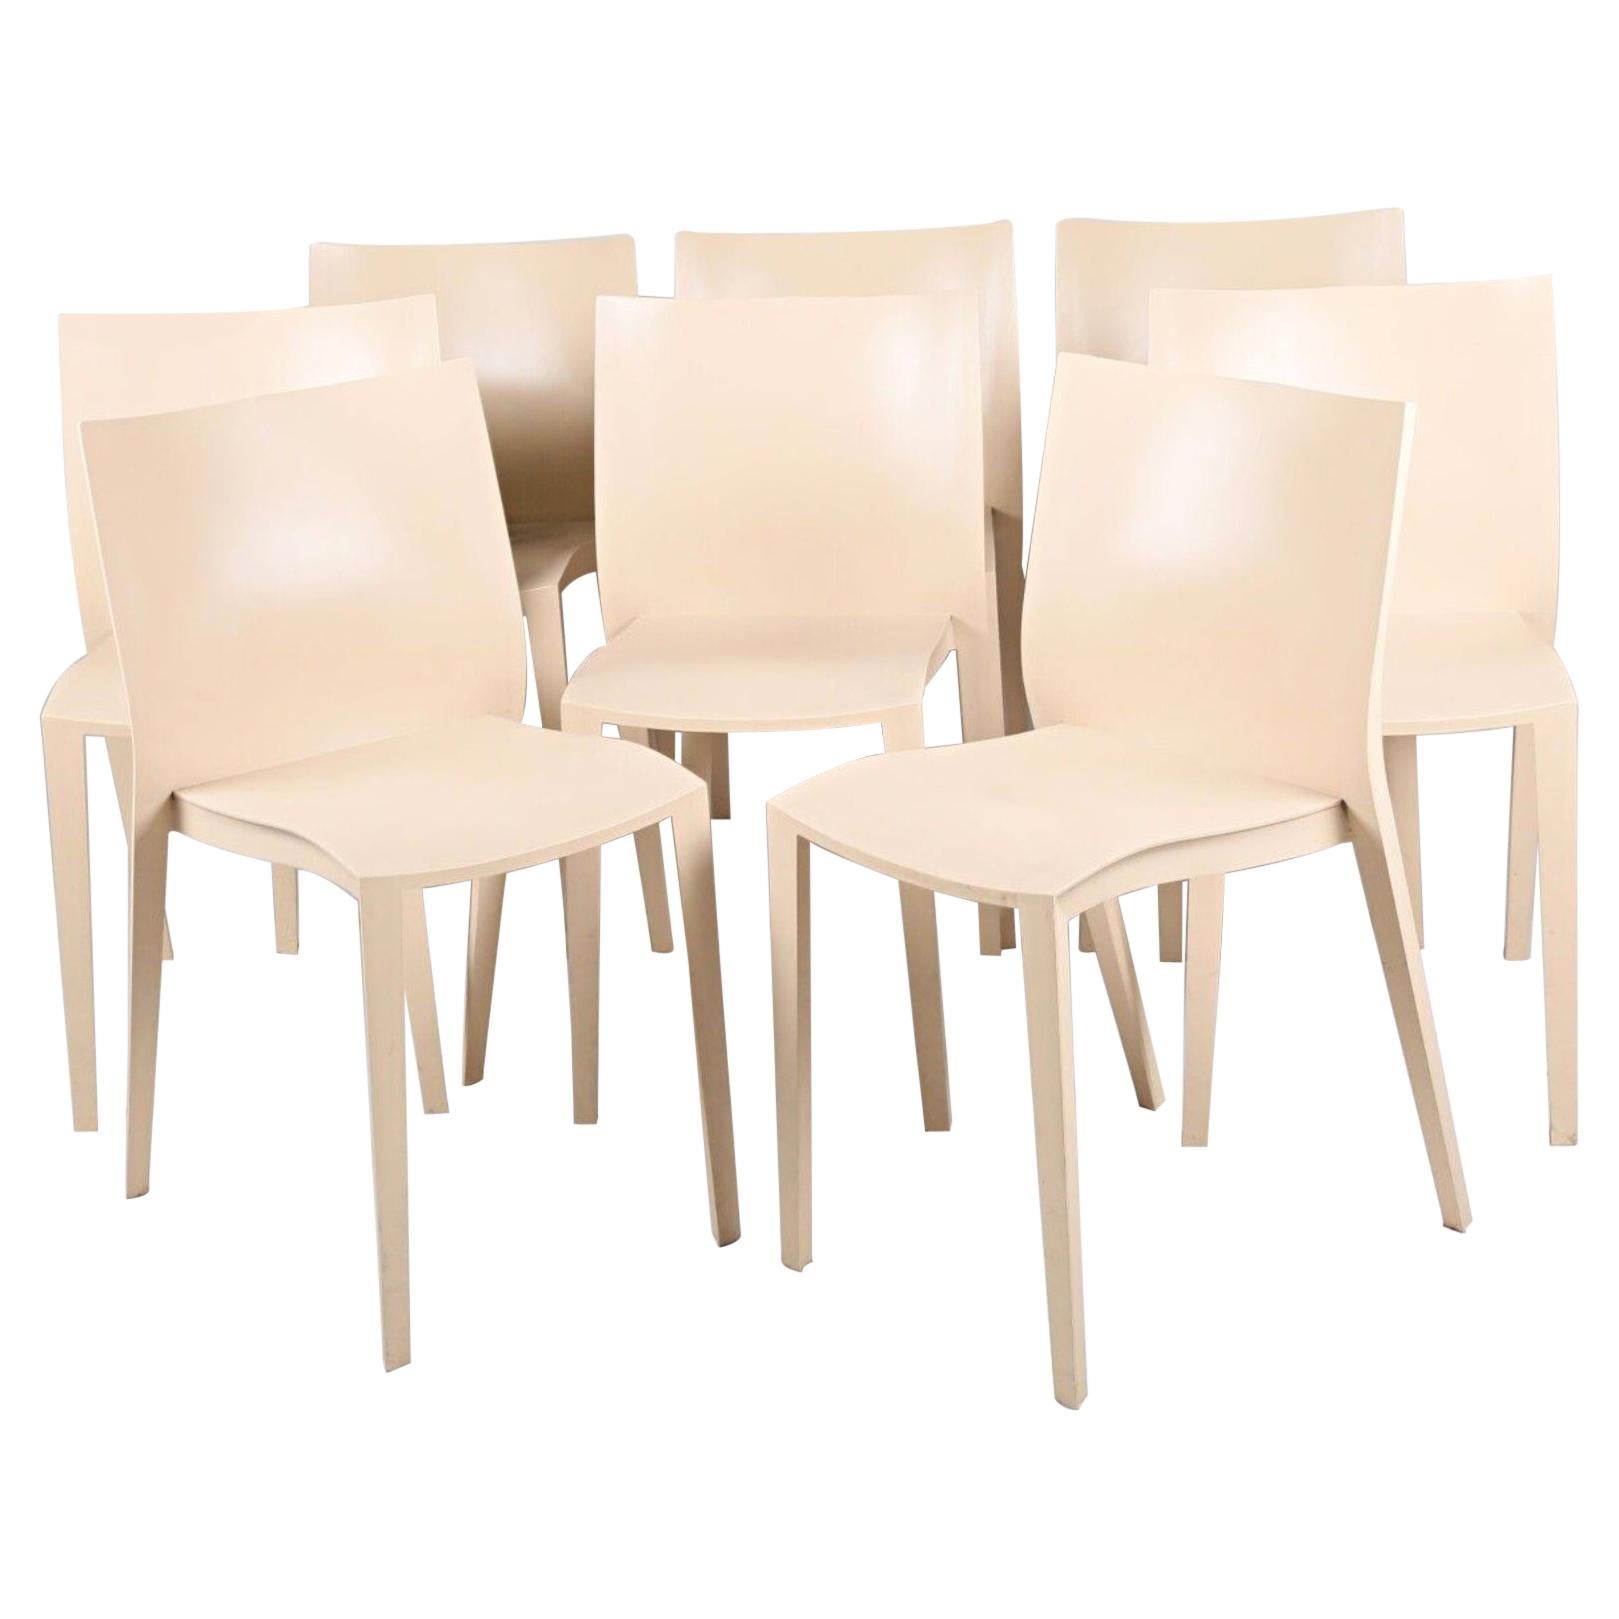 Eight Light Cream Color Plastic Chairs Slick Slick by Philippe Starck For Sale